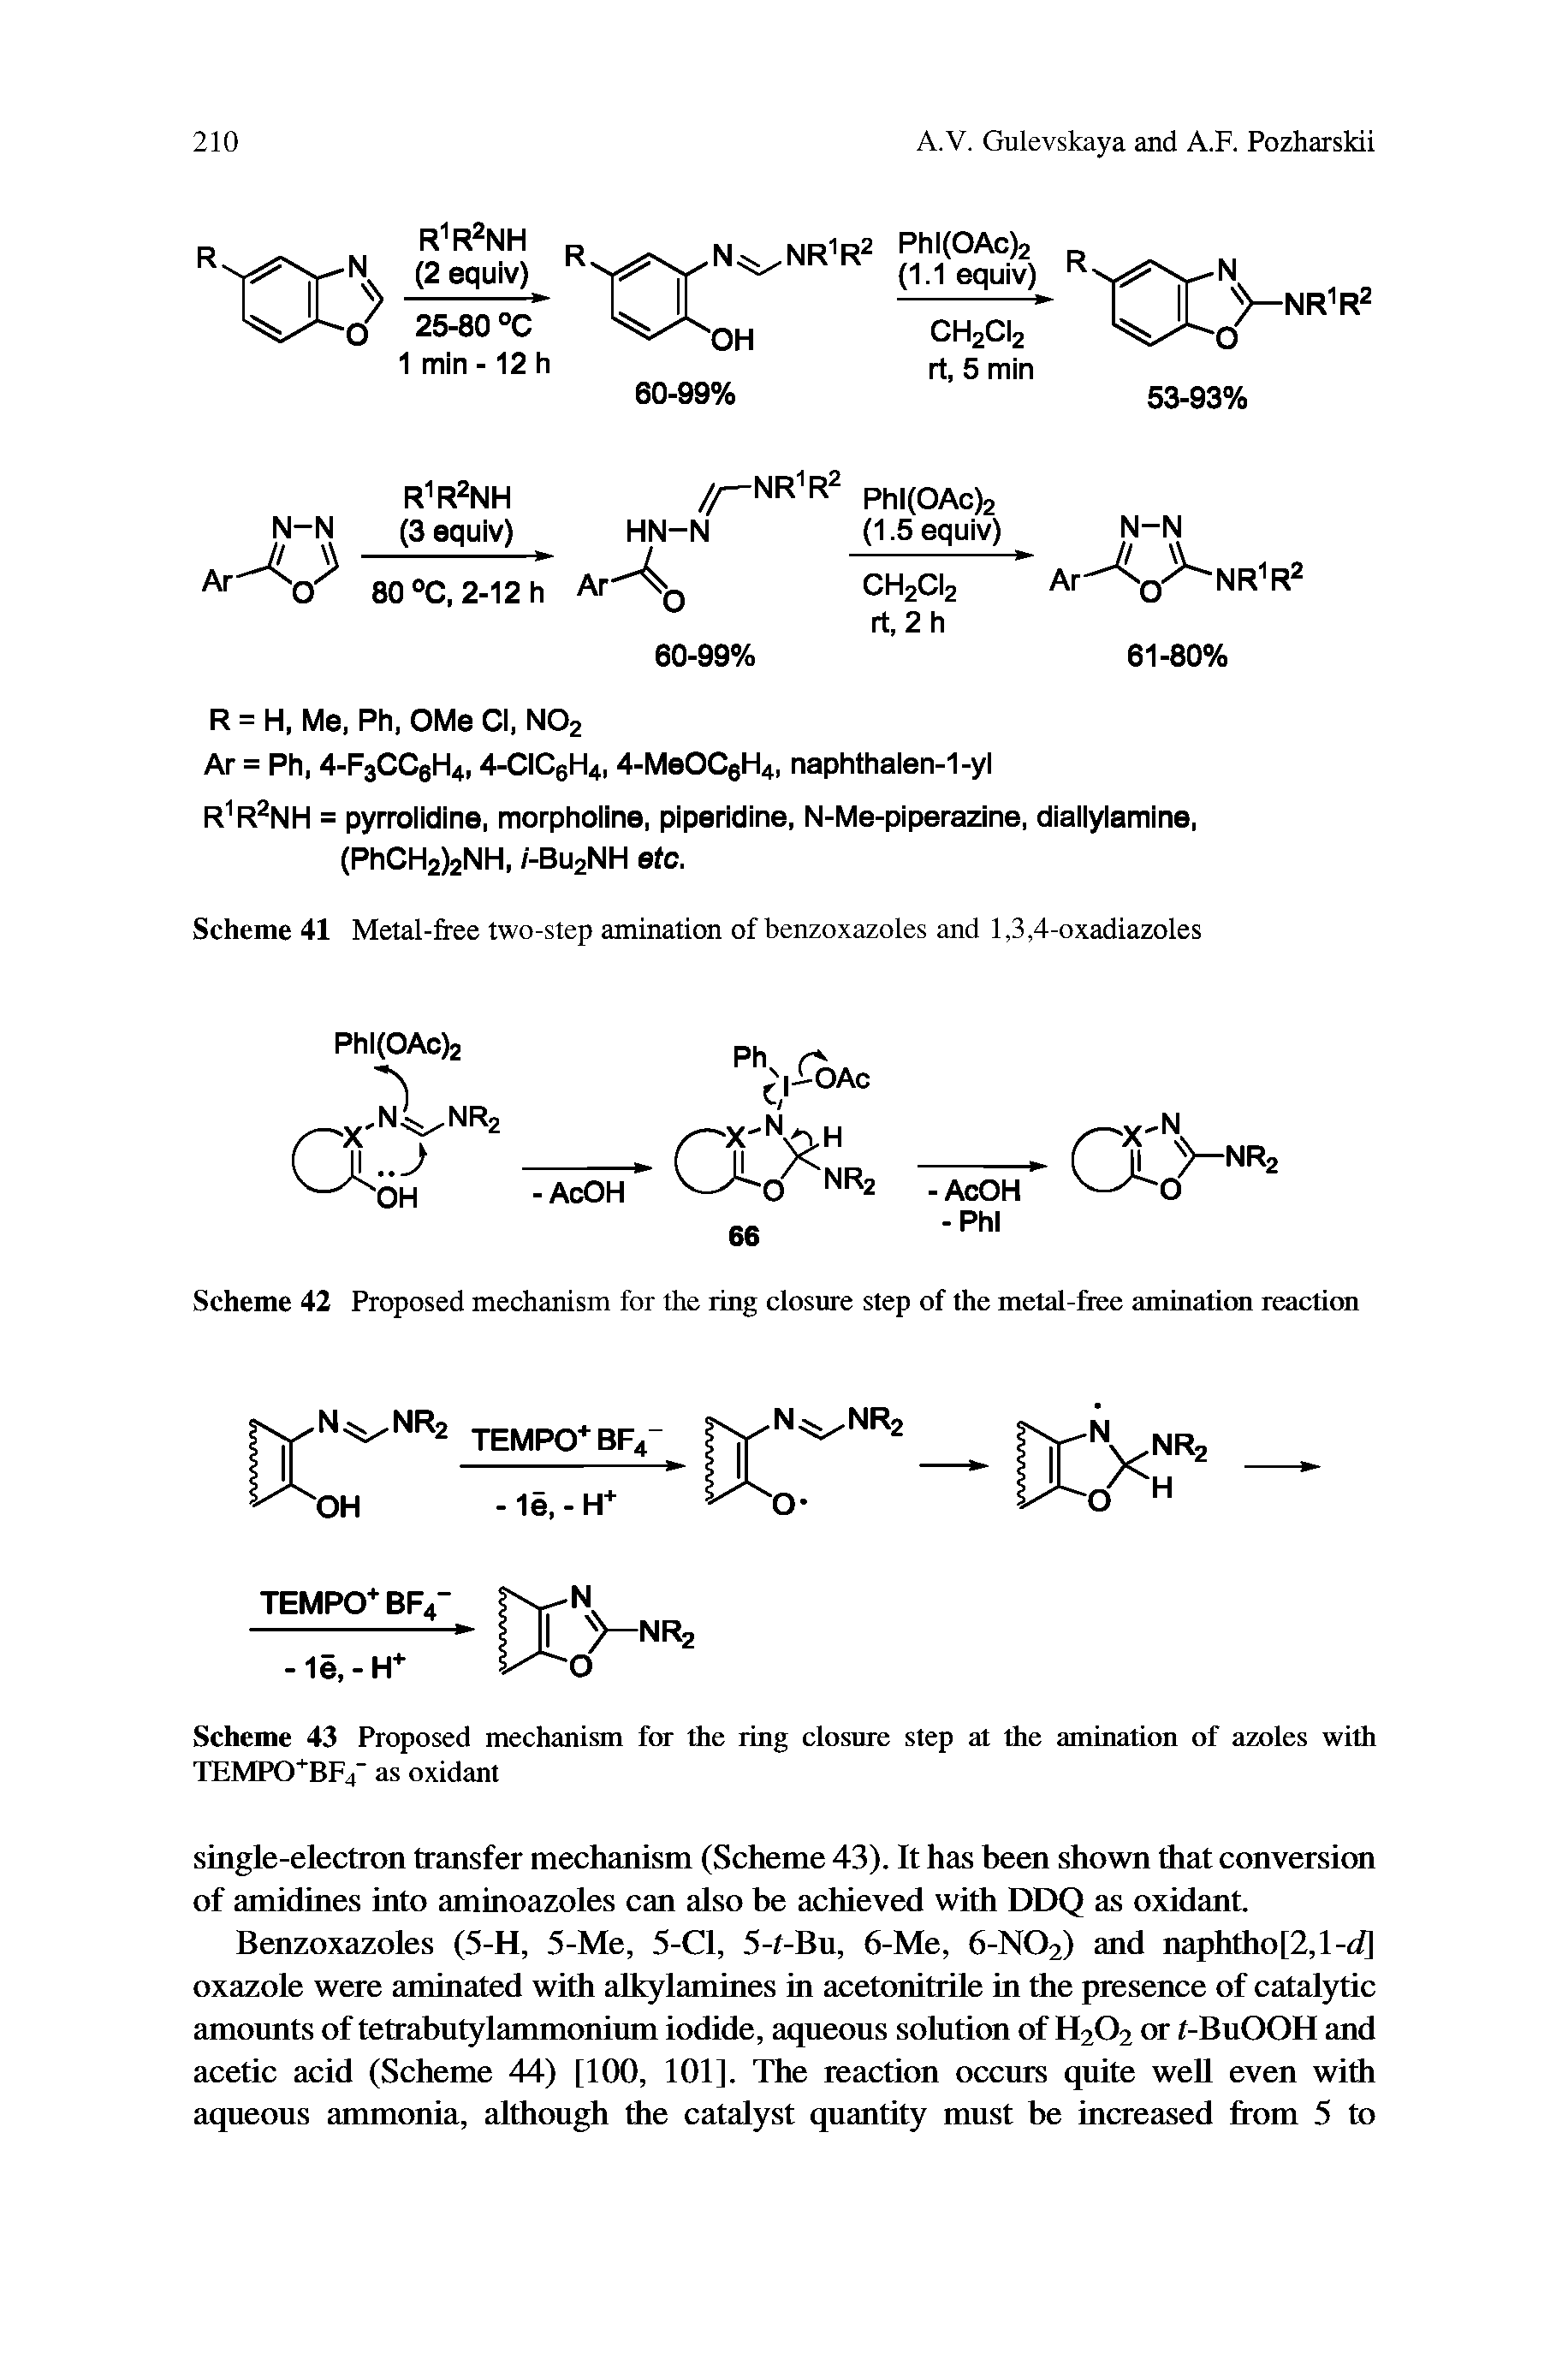 Scheme 41 Metal-free two-step amination of benzoxazoles and 1,3,4-oxadiazoles...